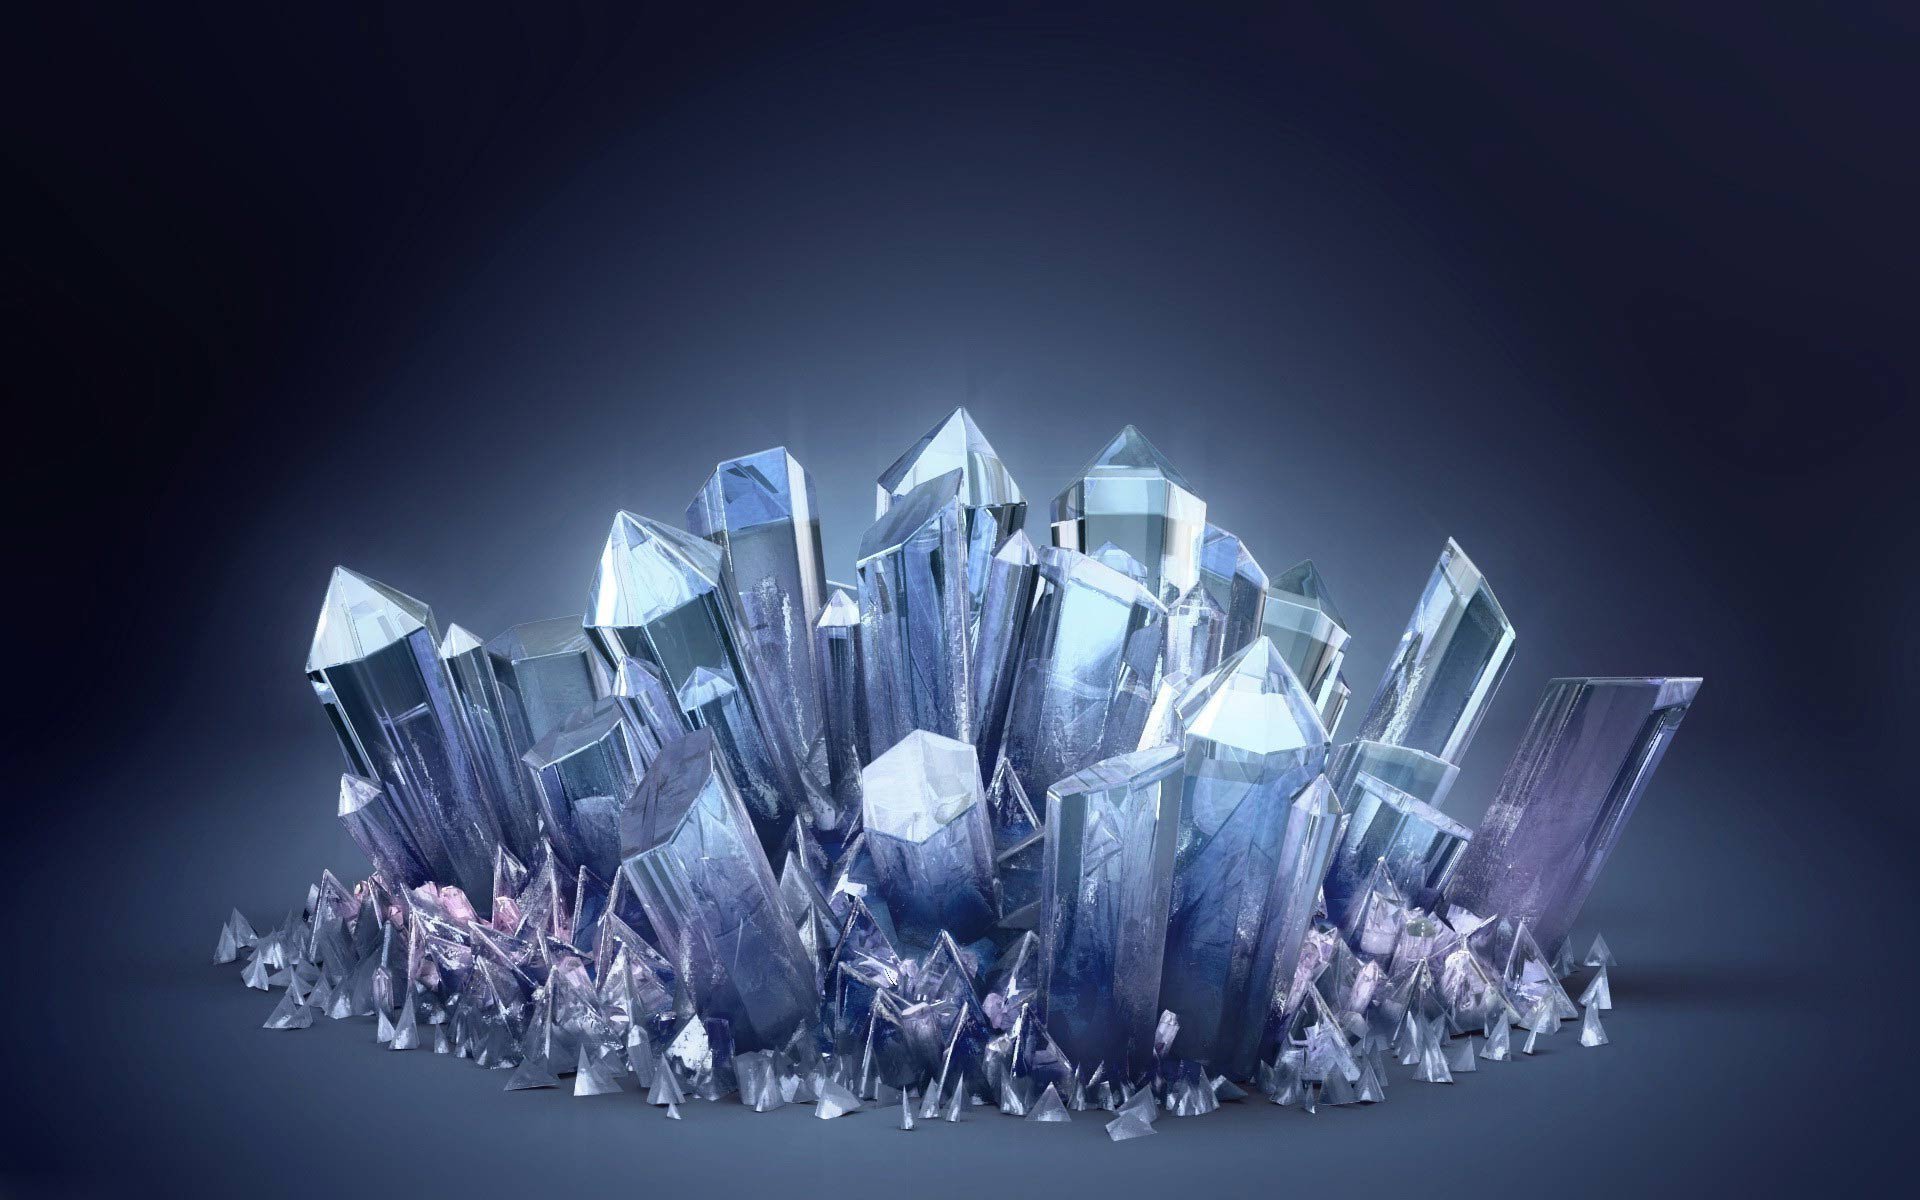 Free Crystal Wallpaper Downloads 200 Crystal Wallpapers for FREE   Wallpaperscom